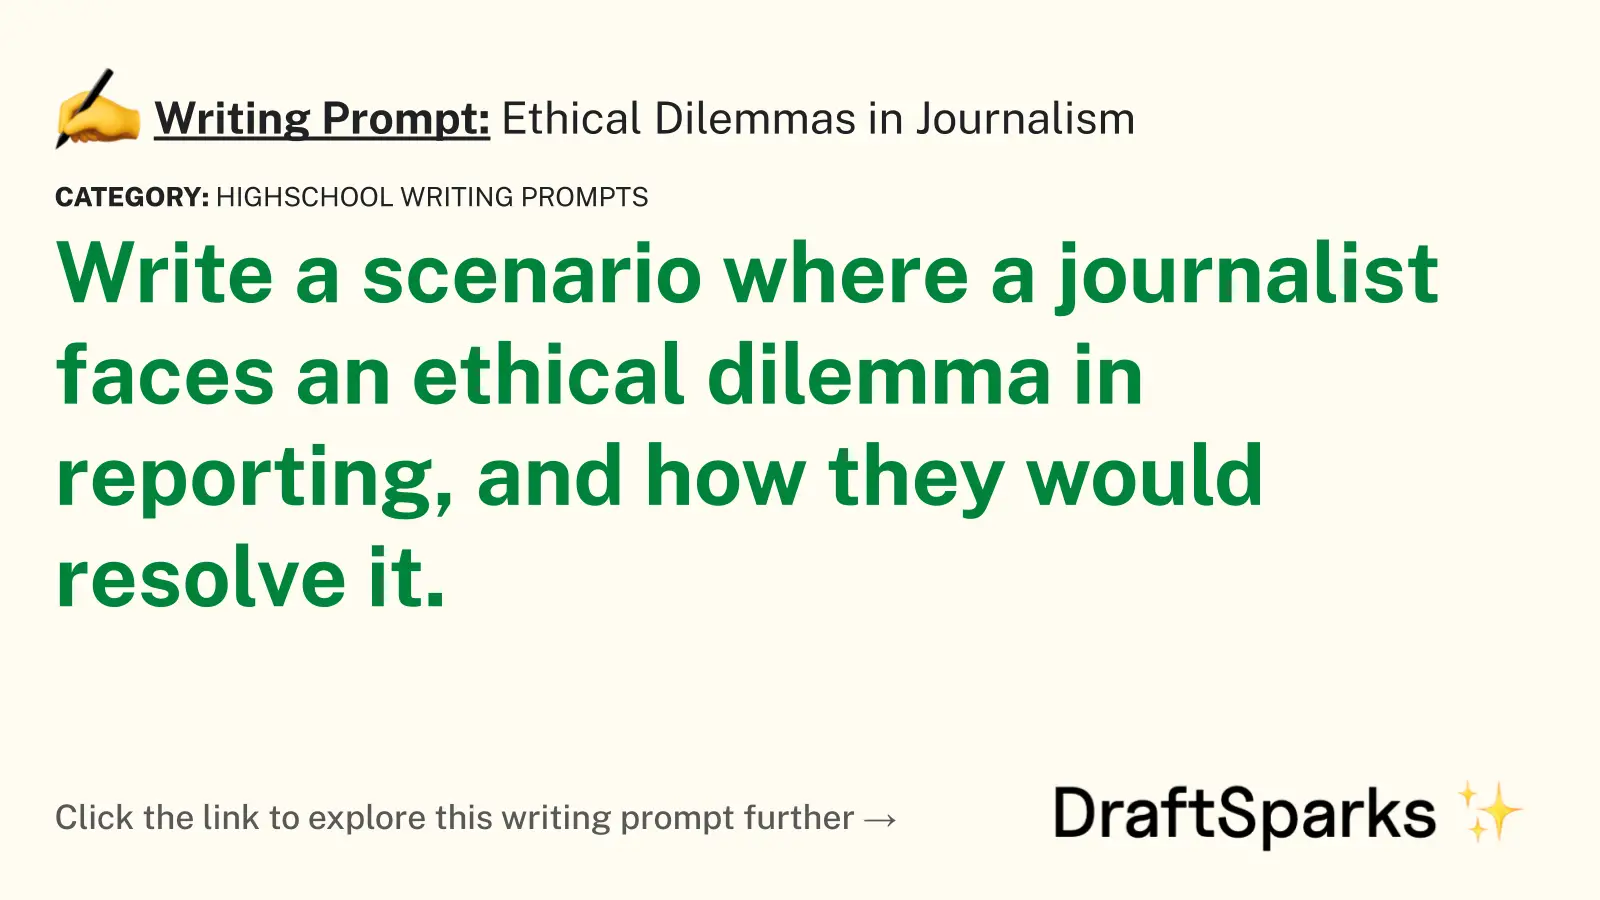 Ethical Dilemmas in Journalism